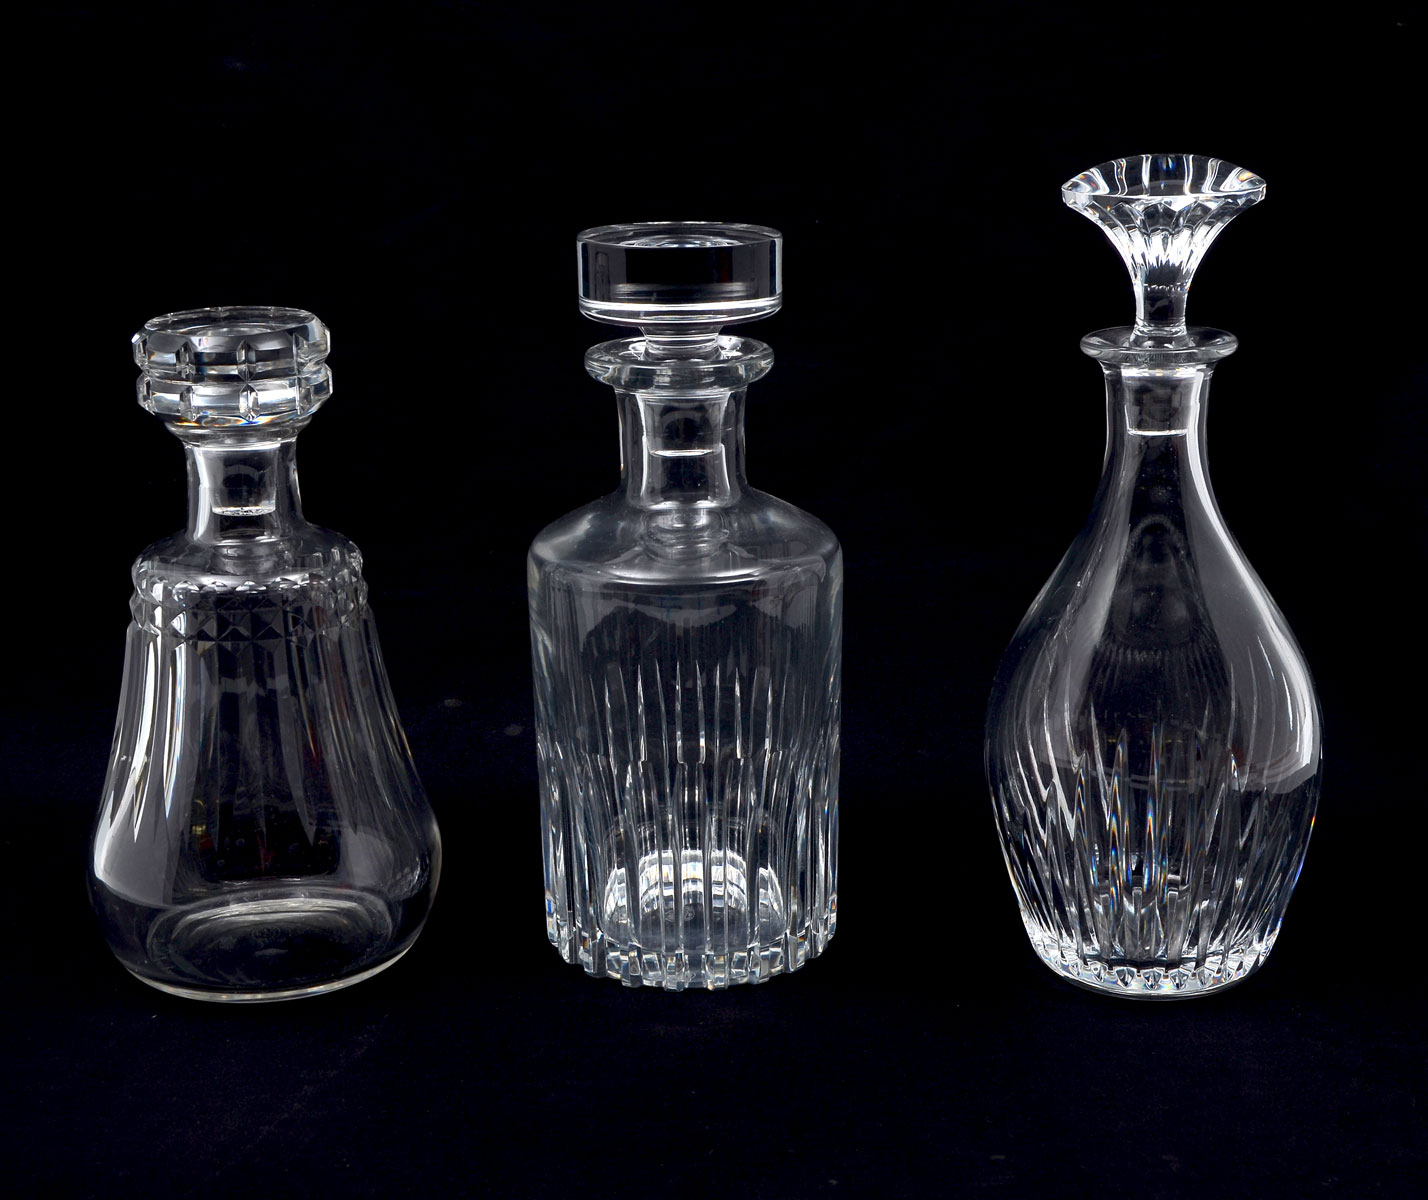 3 RIBBED BACCARAT CRYSTAL DECANTERS: